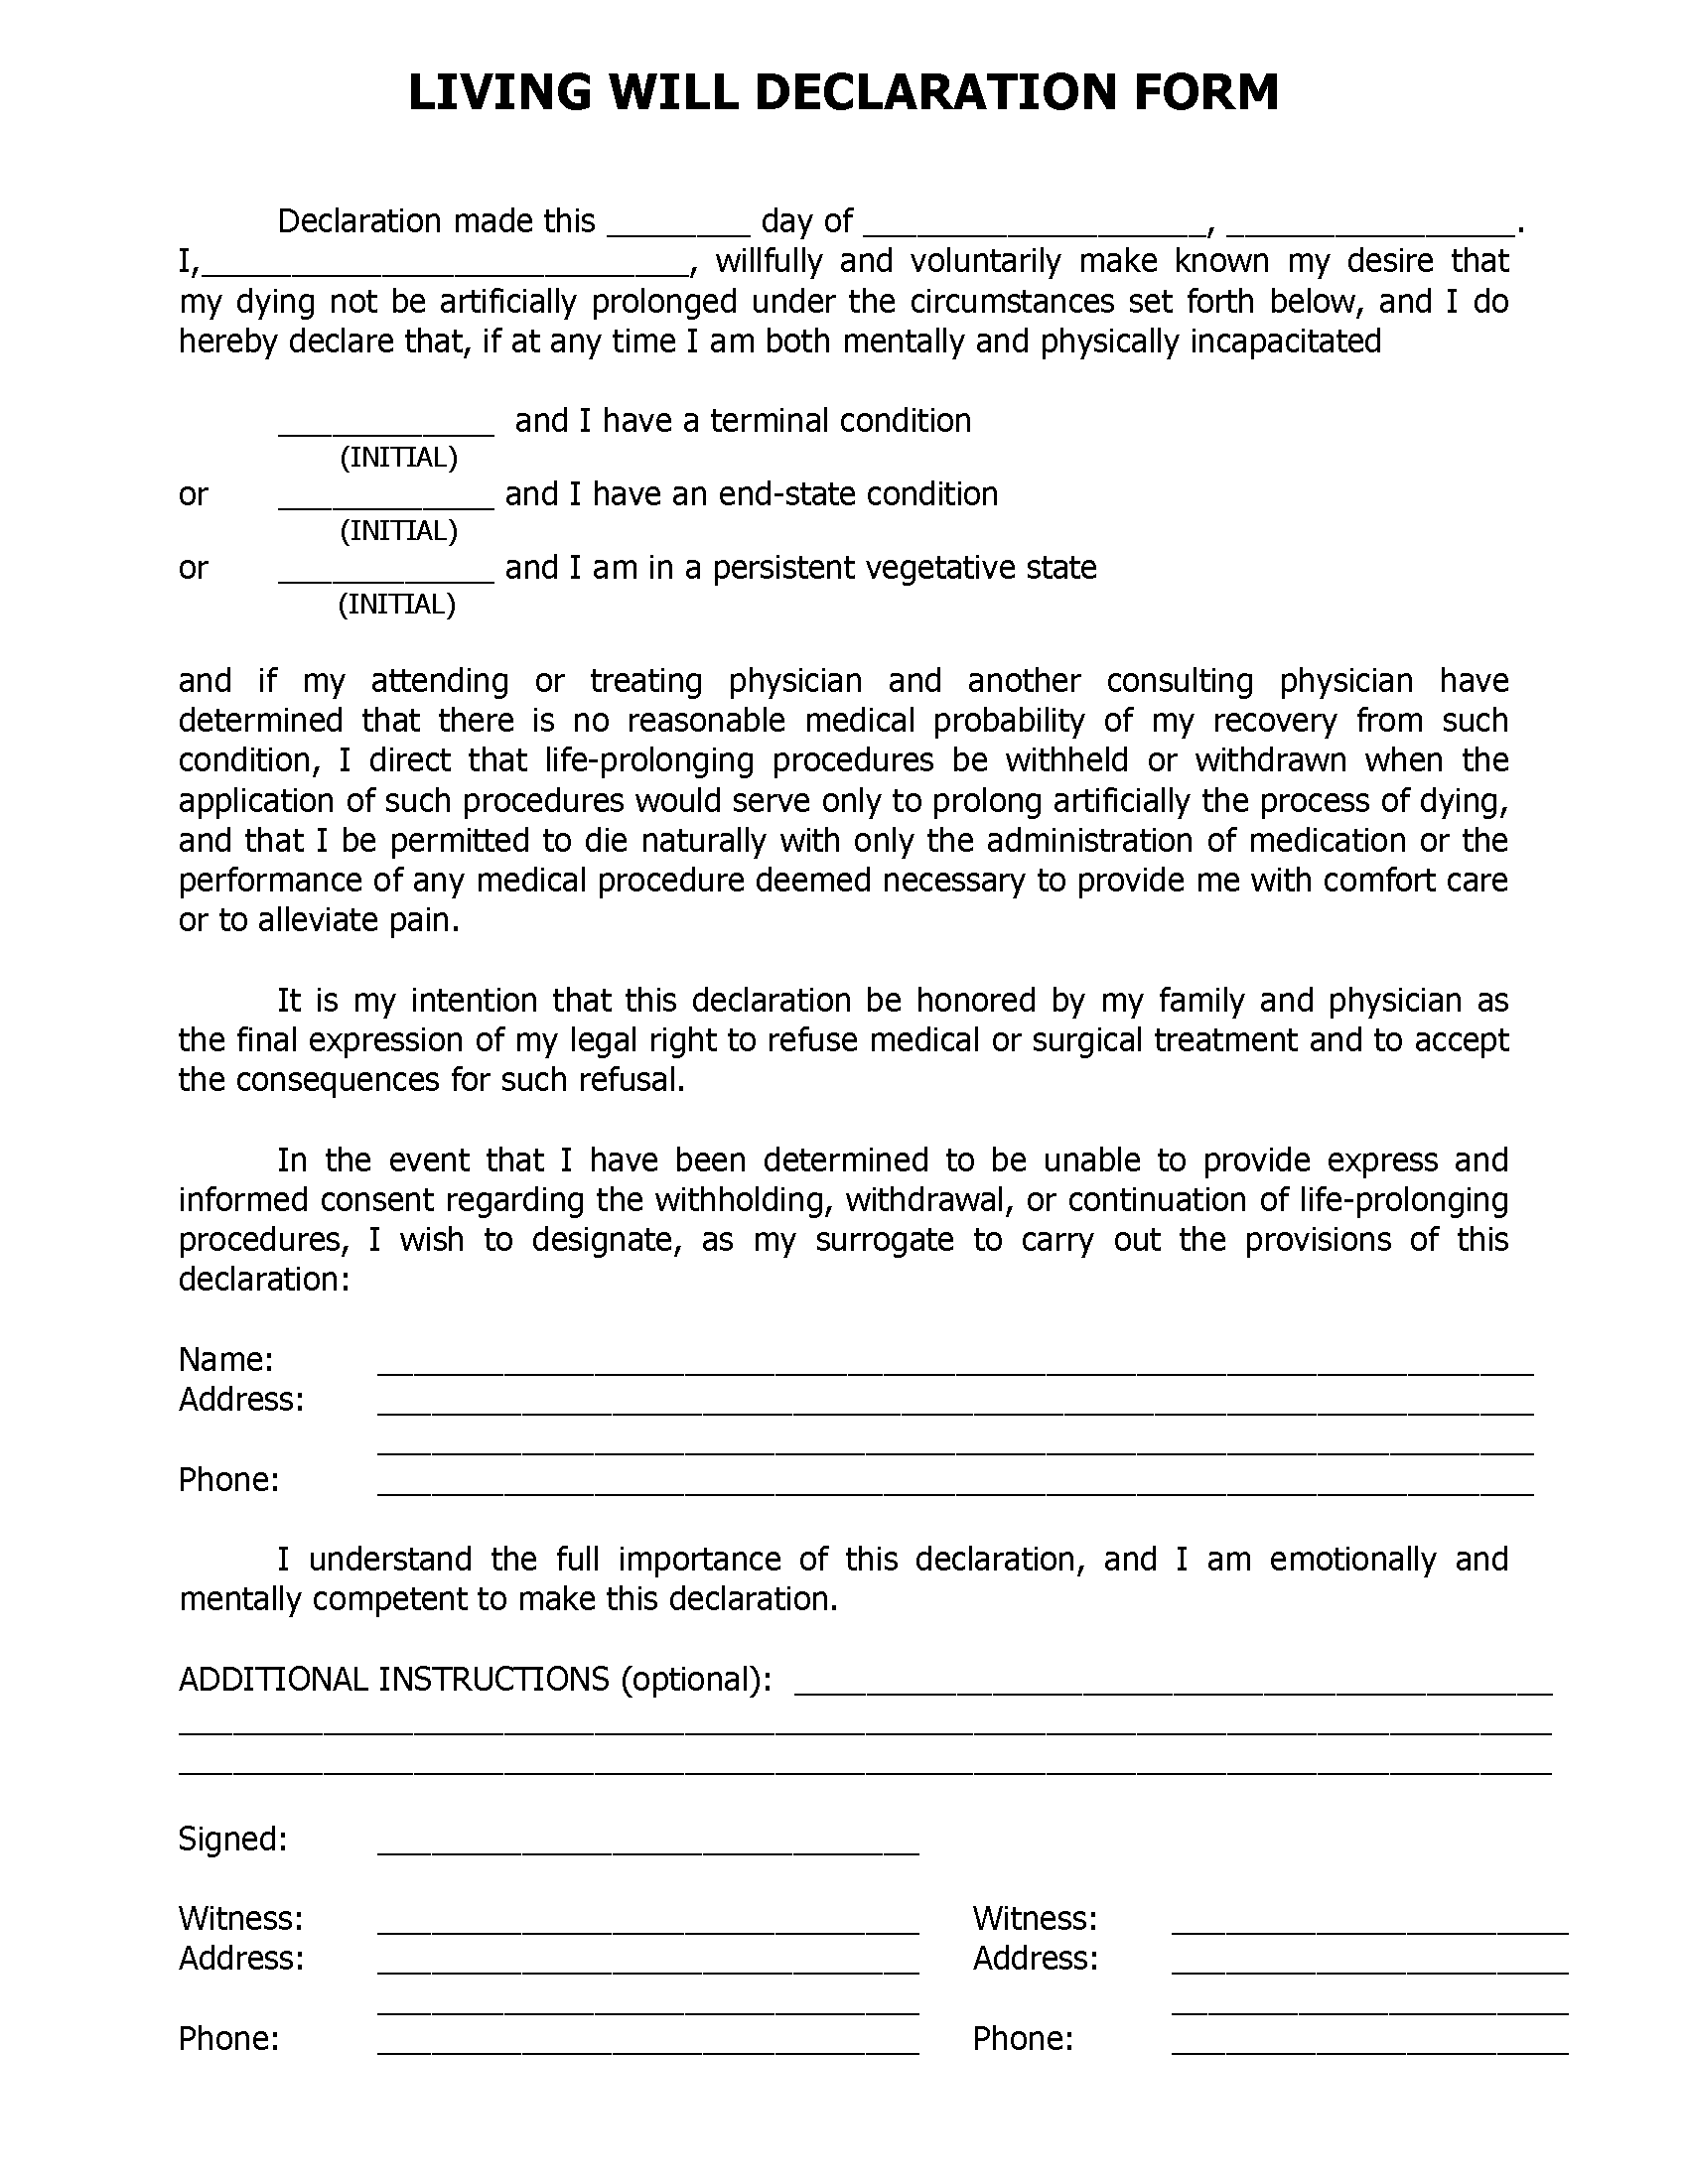 florida-blank-printable-living-will-form-free-printable-legal-forms